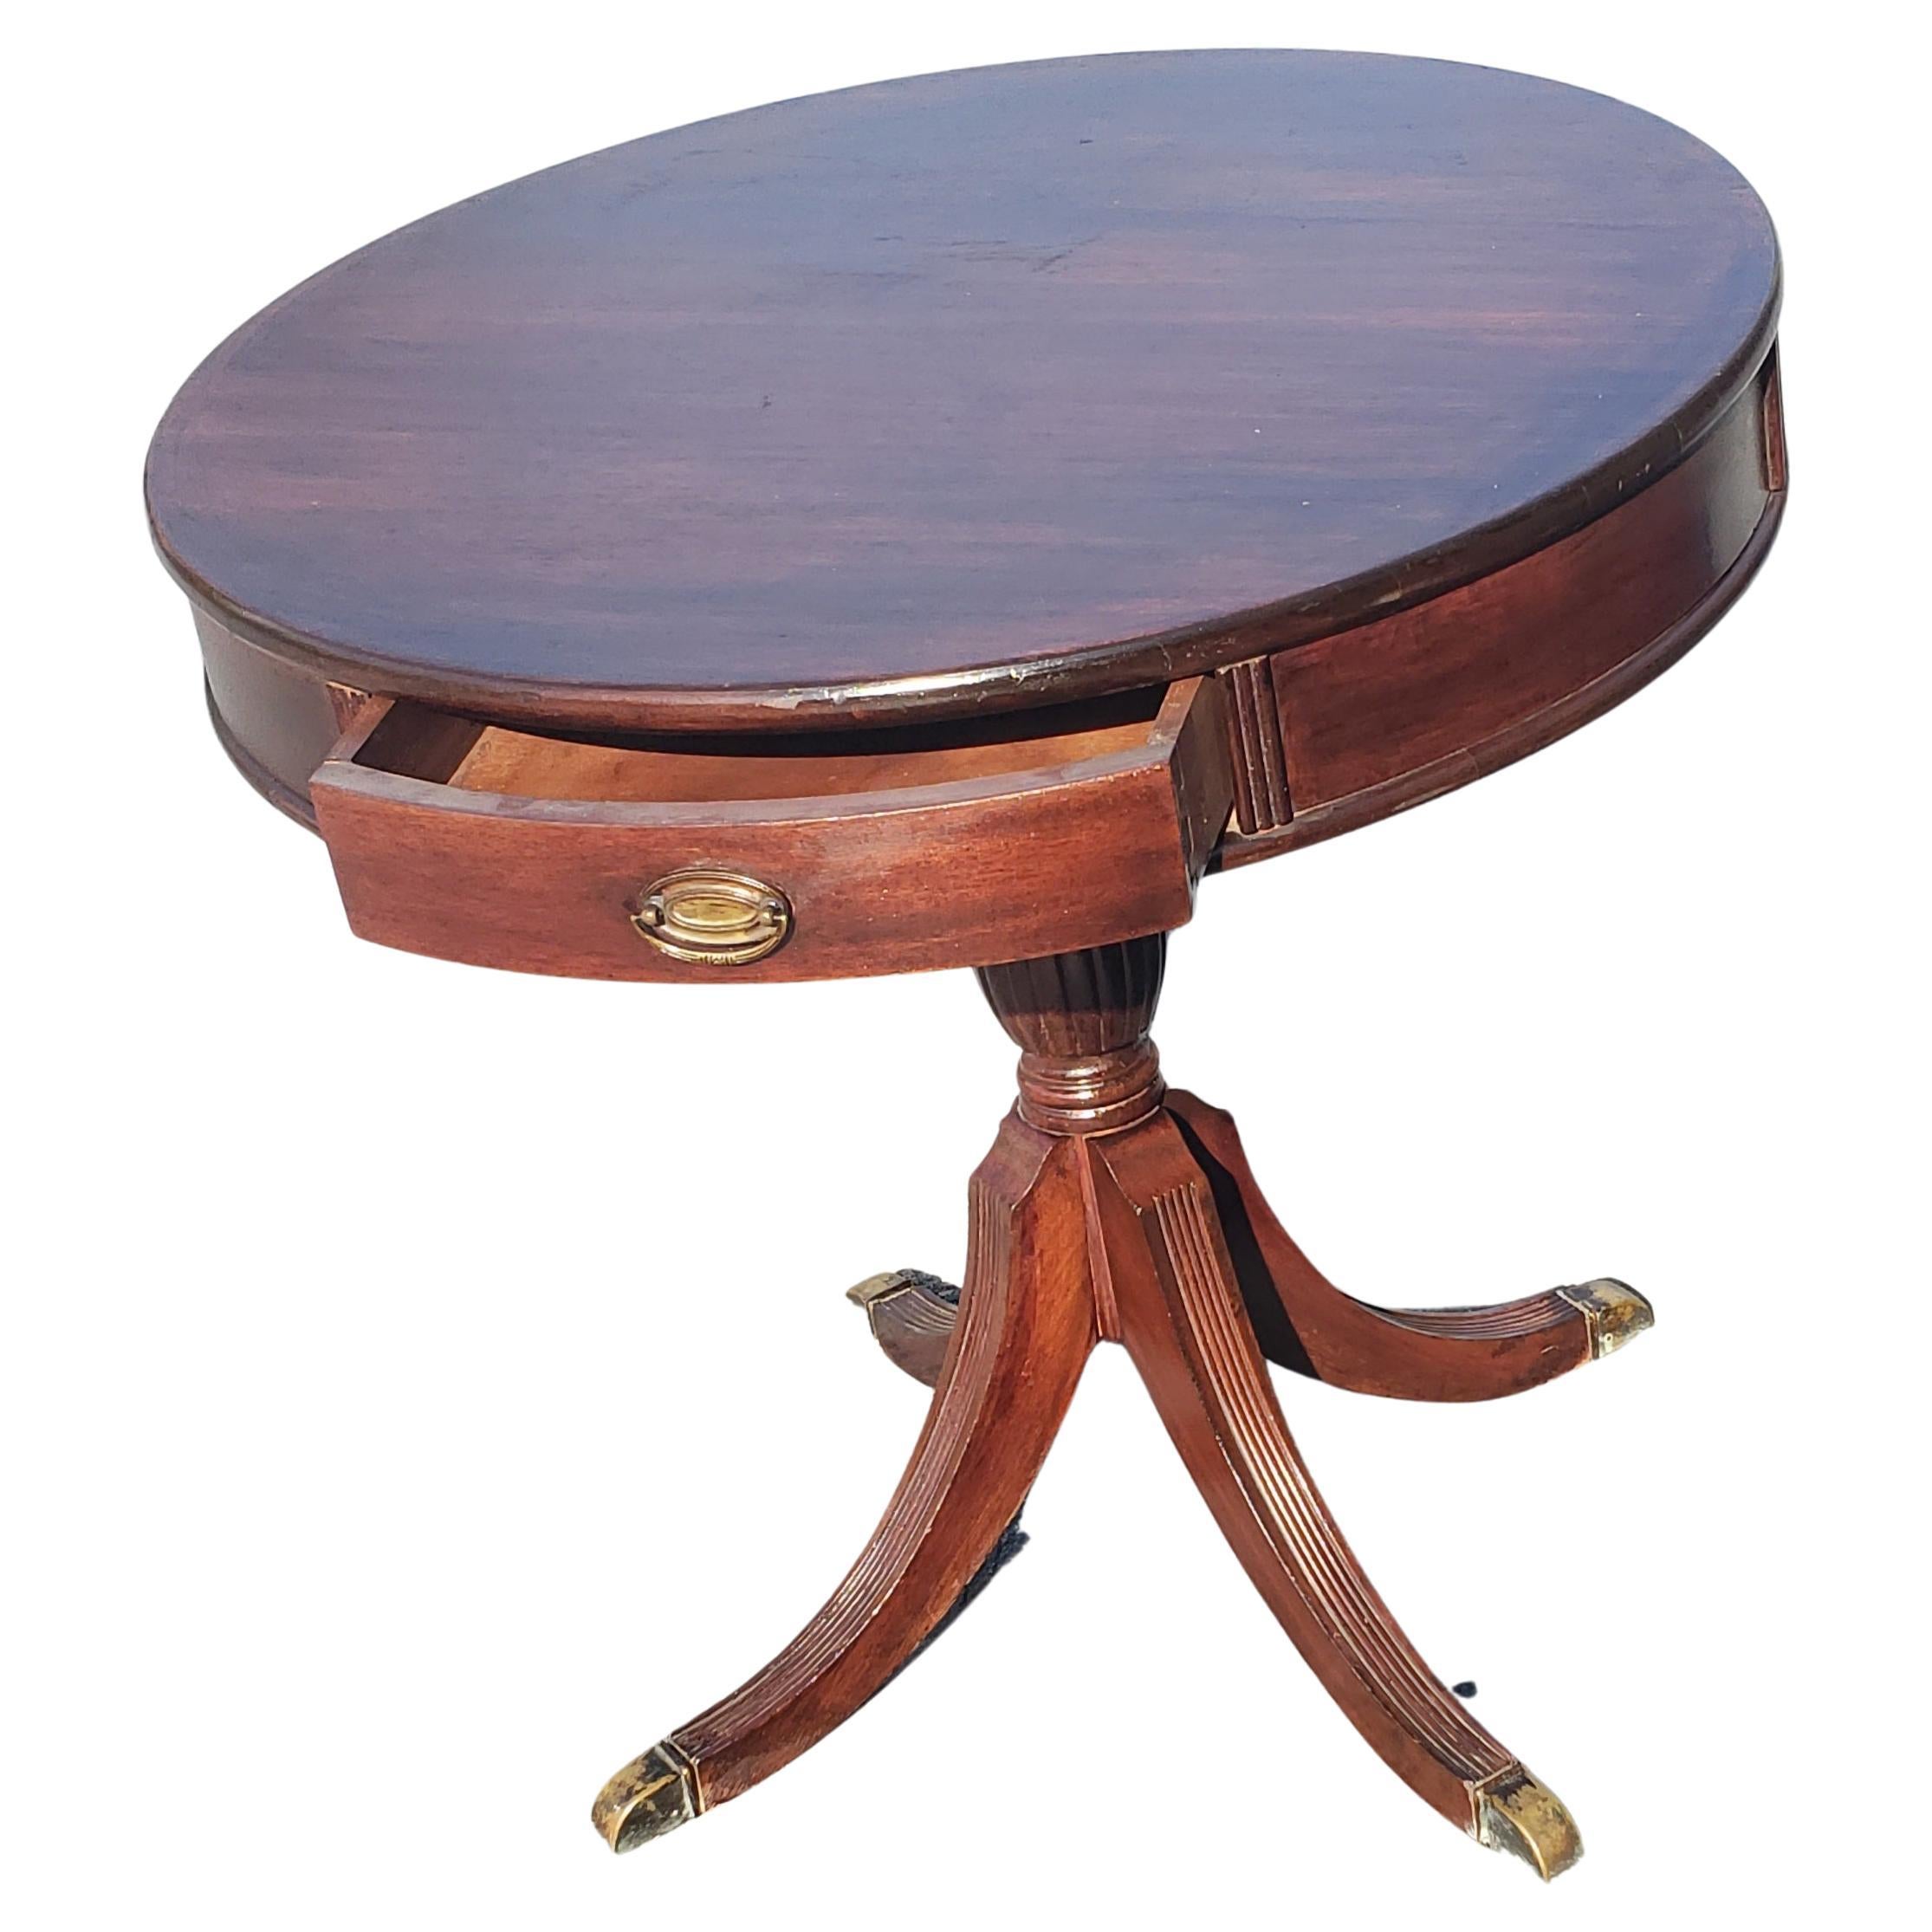 This vintage mahogany drum table was crafted in the US around the year 1940. The mahogany looks incredible, with a rich complexion that is framed beautifully by an array of details. The turned pedestal base was crafted in a traditional Georgian